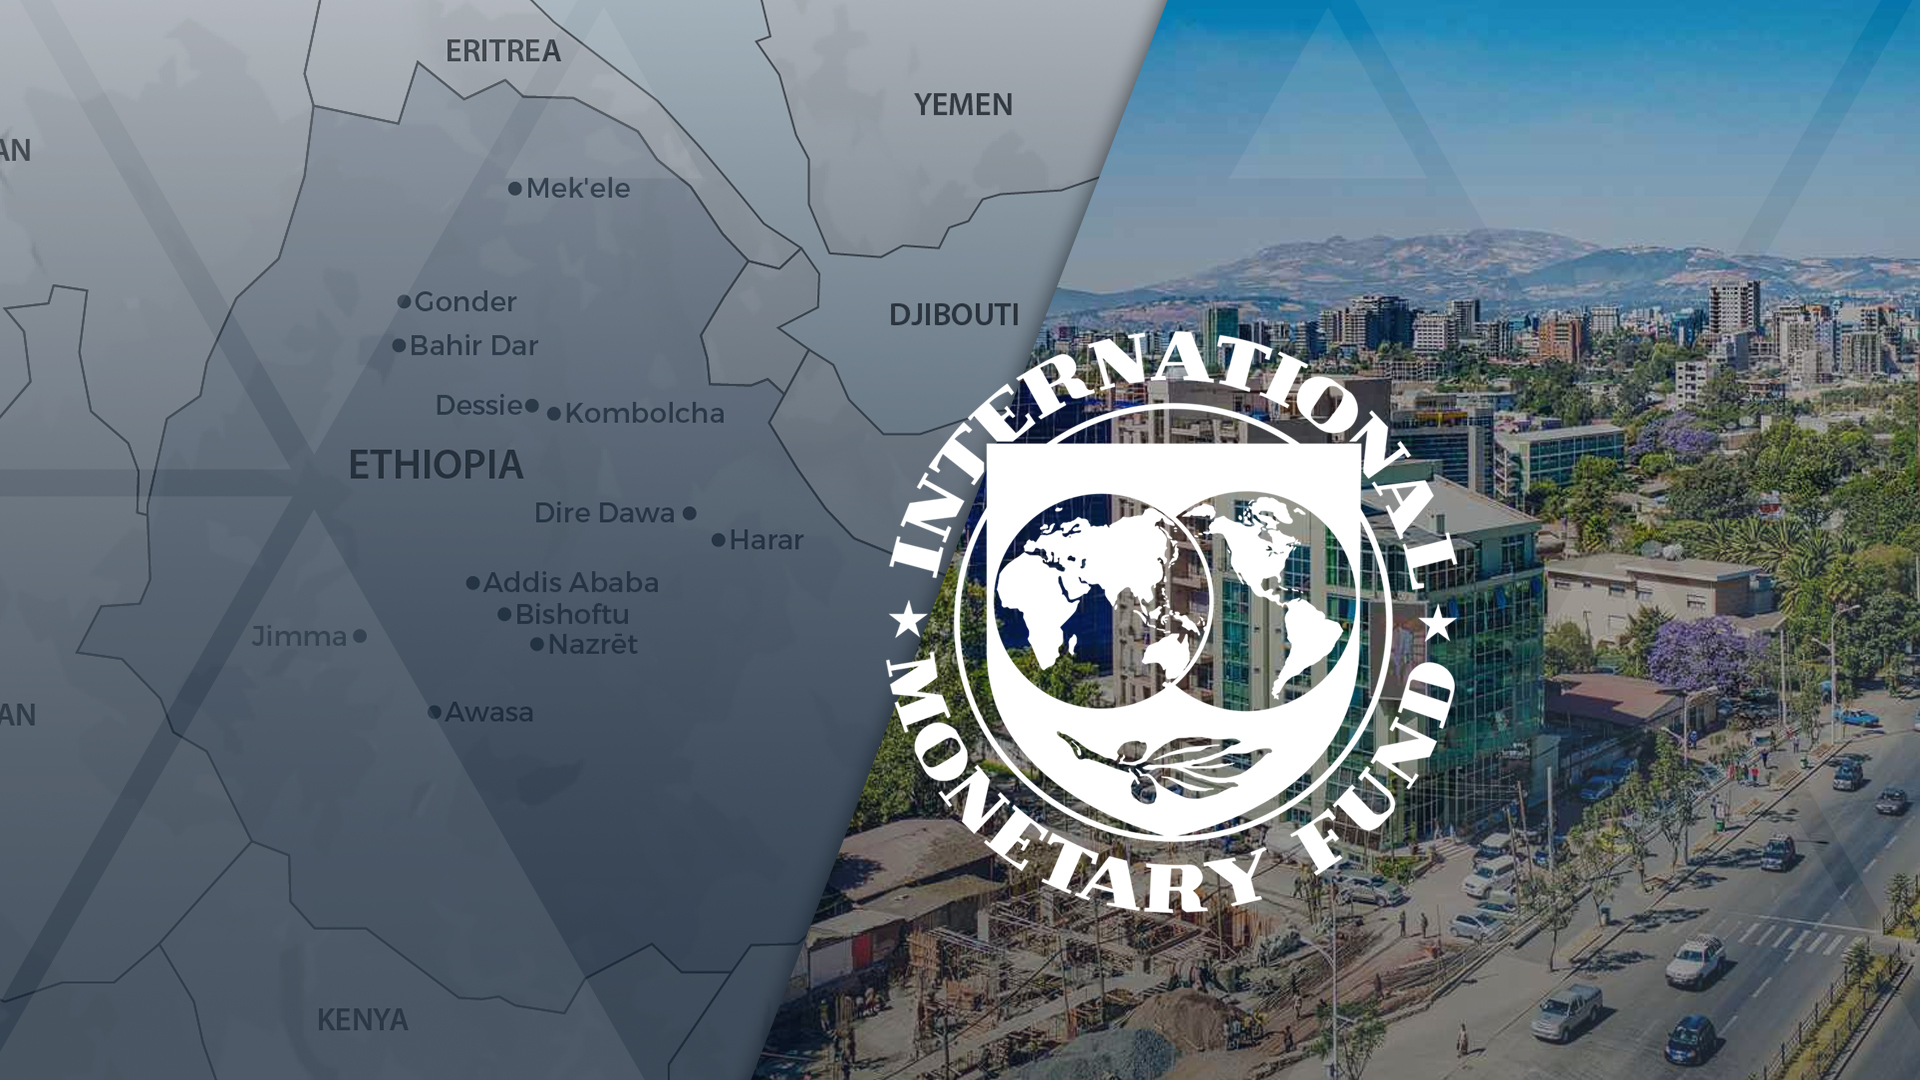 ETHIOPIA: IMF DEAL WITHIN REACH DESPITE DEBT CONCERNS AND PERSISTENT INSECURITY